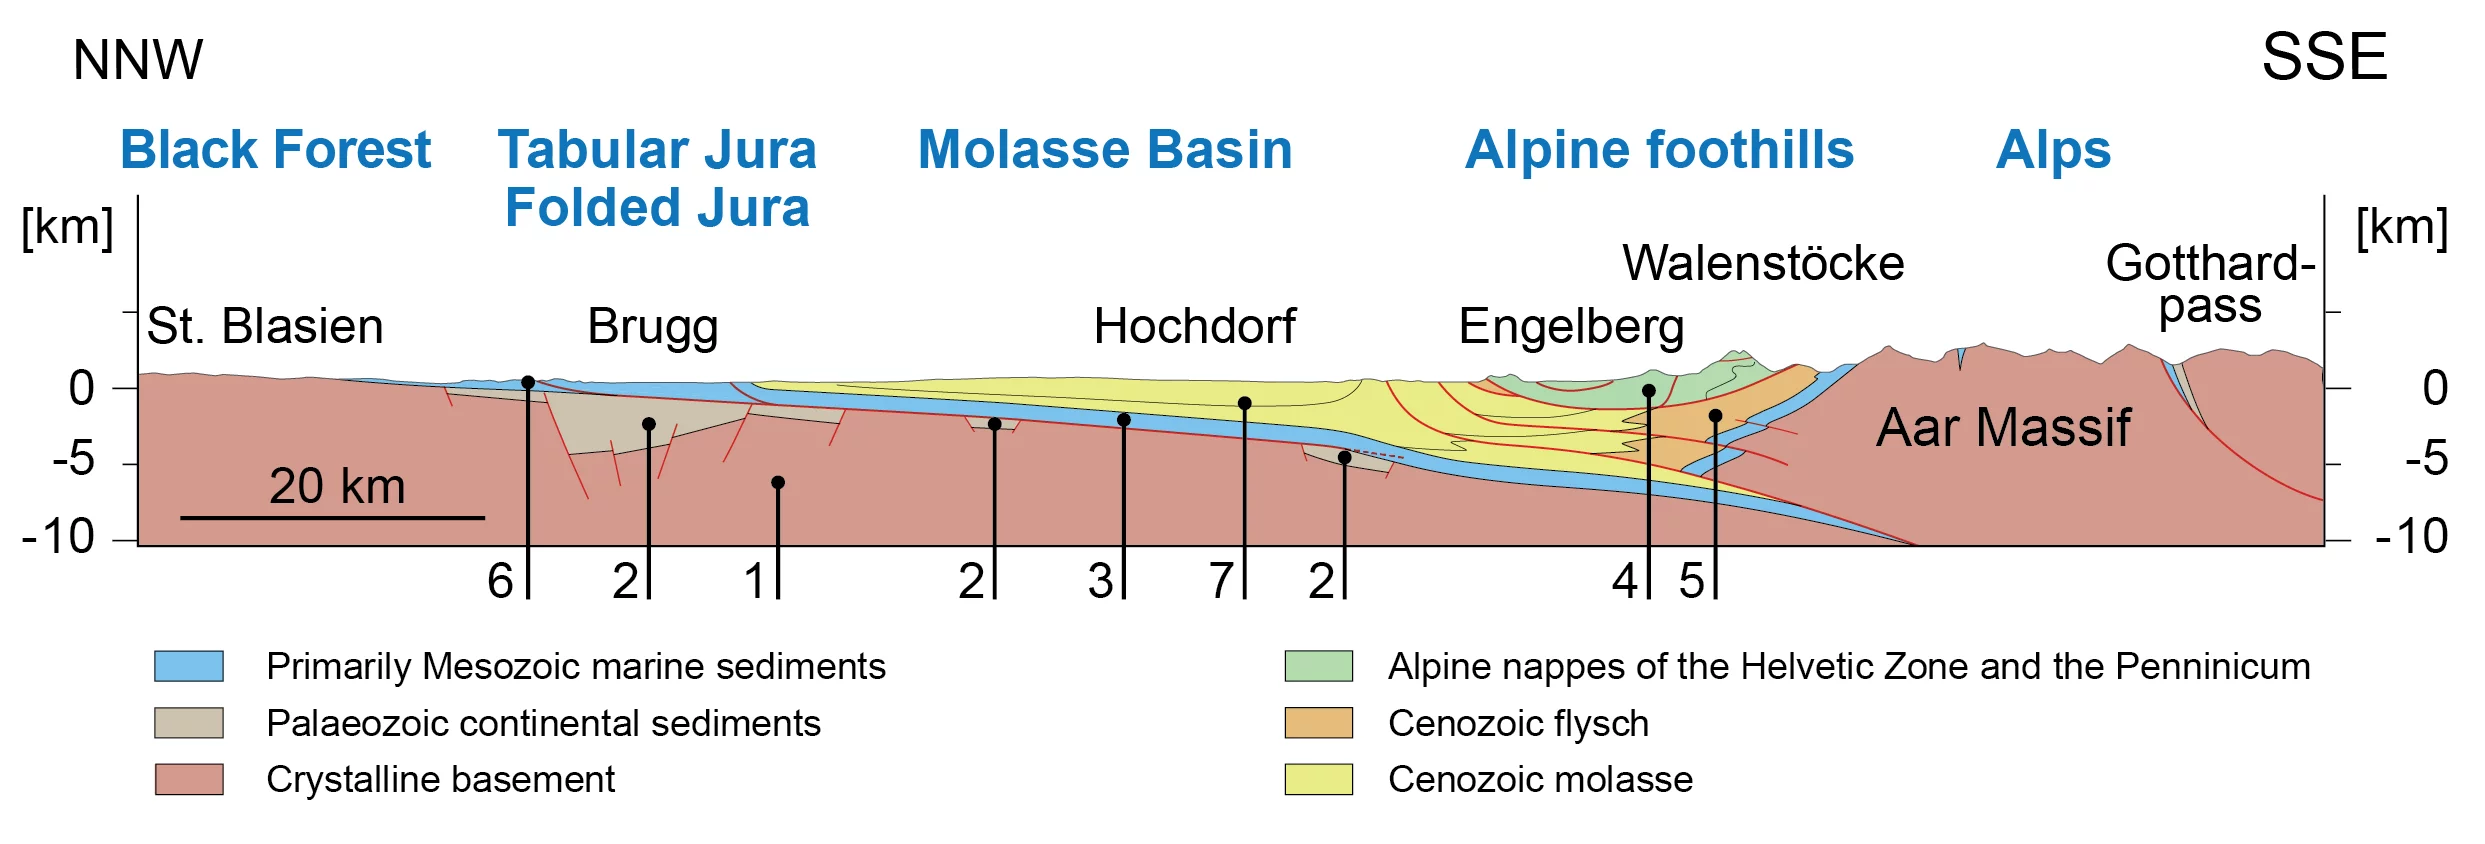 Geological profile of Switzerland from north-north-west to south-south-east (numerals explained in text below). Source: Nagra NTB 14- 02, Dossier III (greatly simplified).